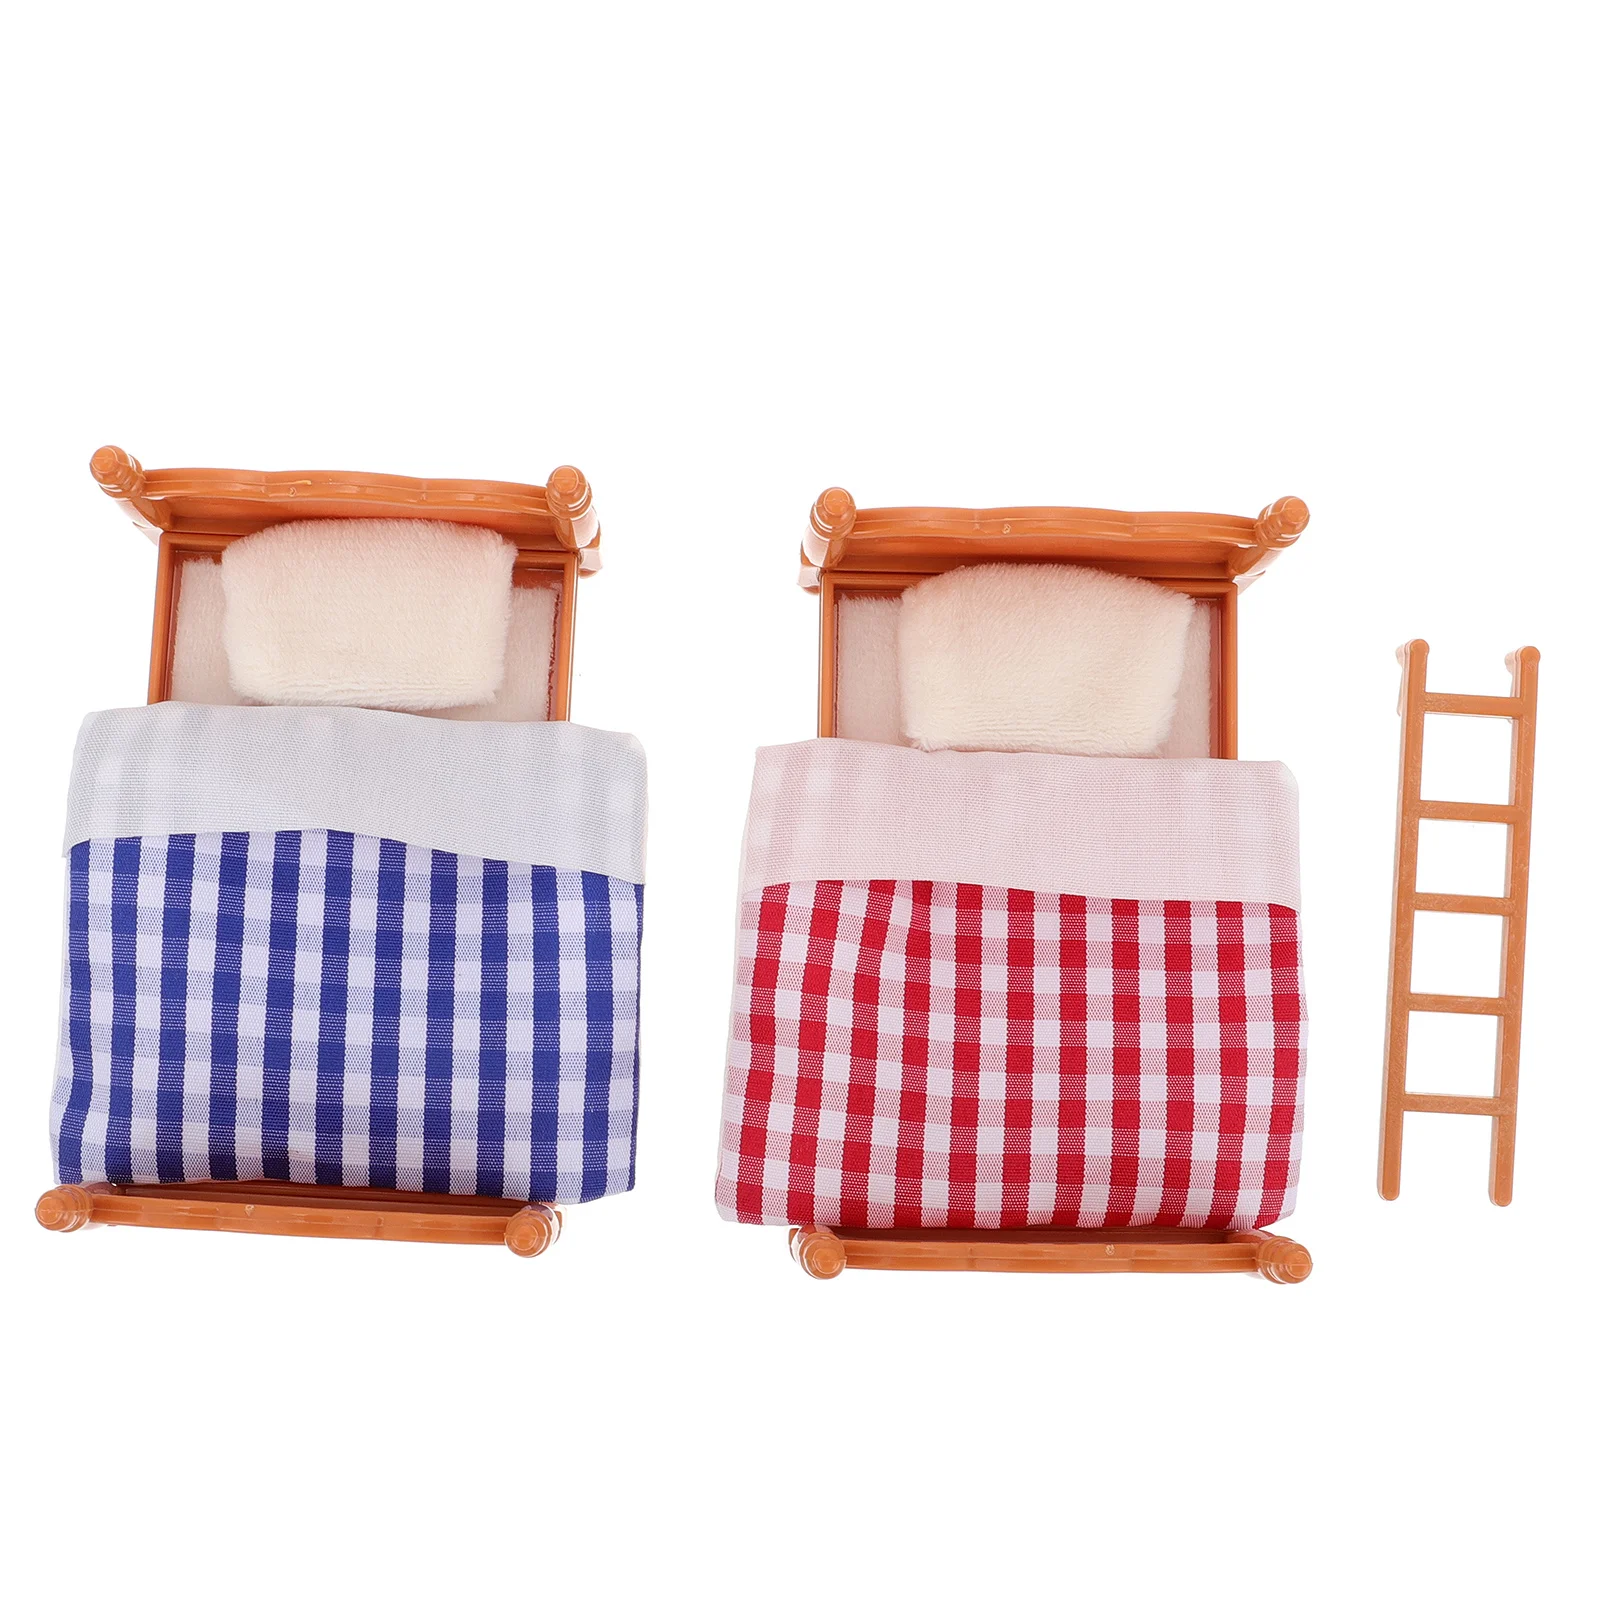 

Bed Miniature House Bunk Mini Bedstoy Furniture Model Bedroom Supplies Scene Furnishingsaccessories Simulationforwood Toys